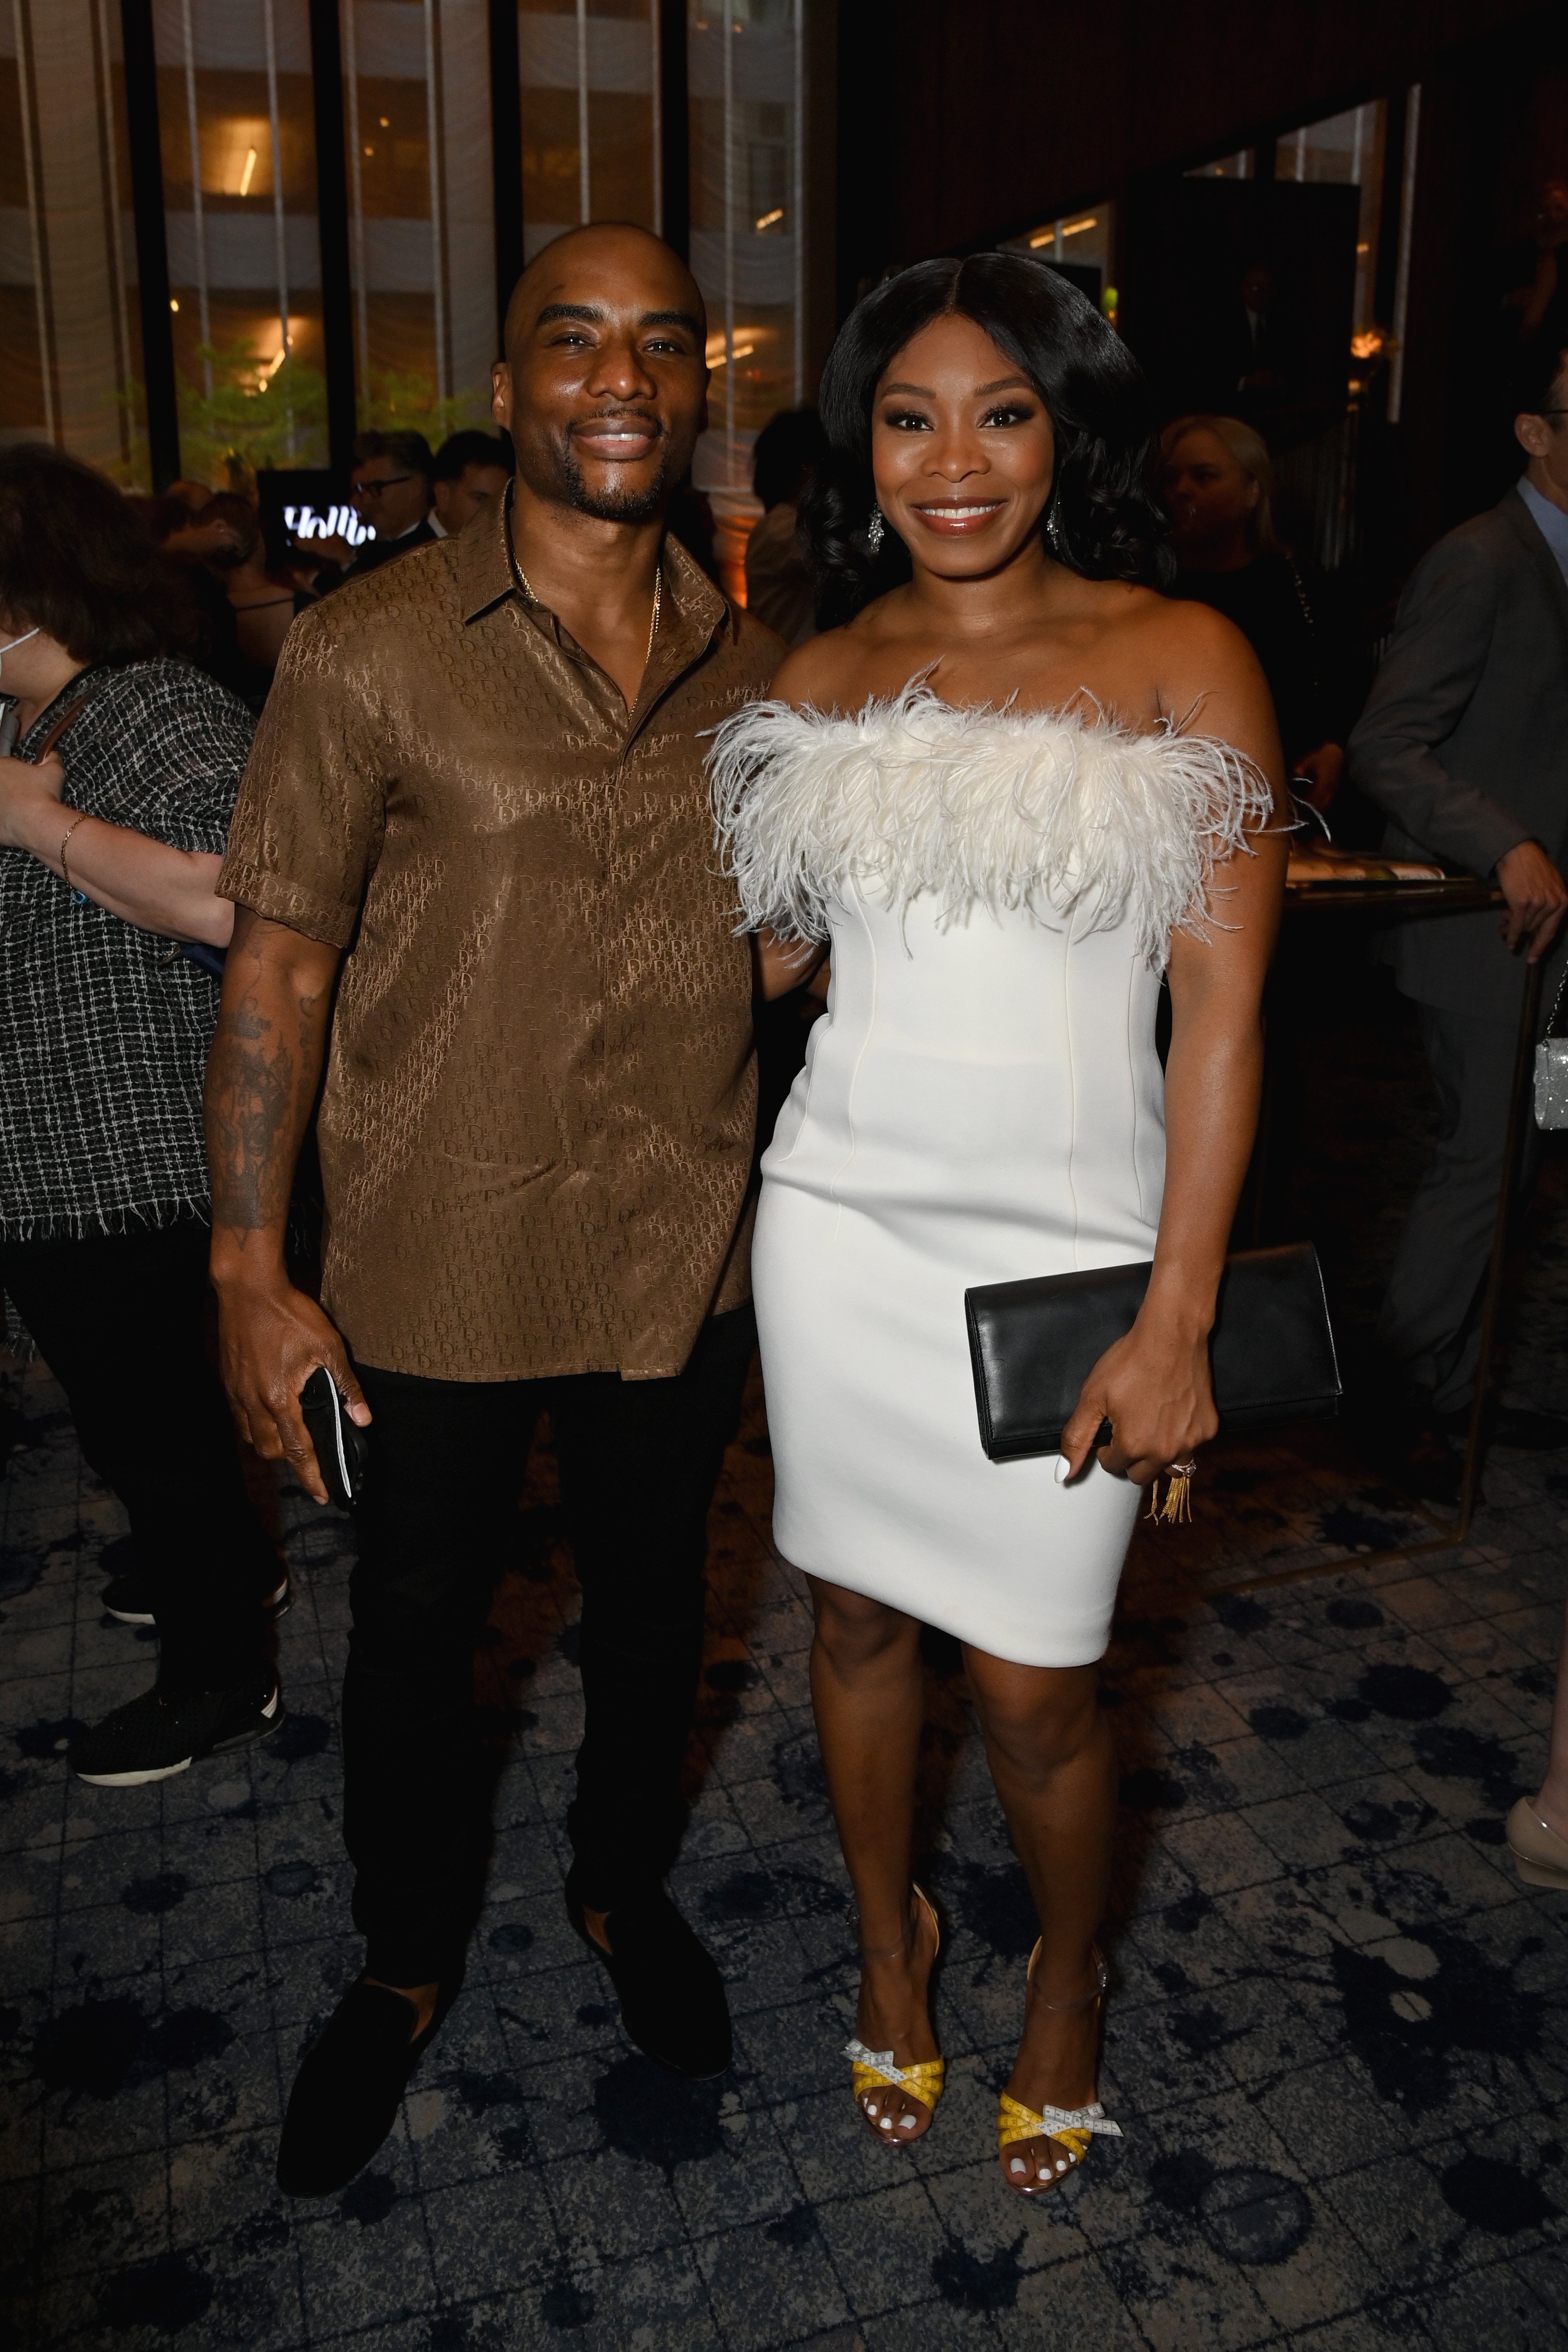  Charlamagne tha God and Jessica Gadsden at “The Hollywood Reporter Most Powerful People In Media” on May 17, 2022, in New York. | Source: Getty Images